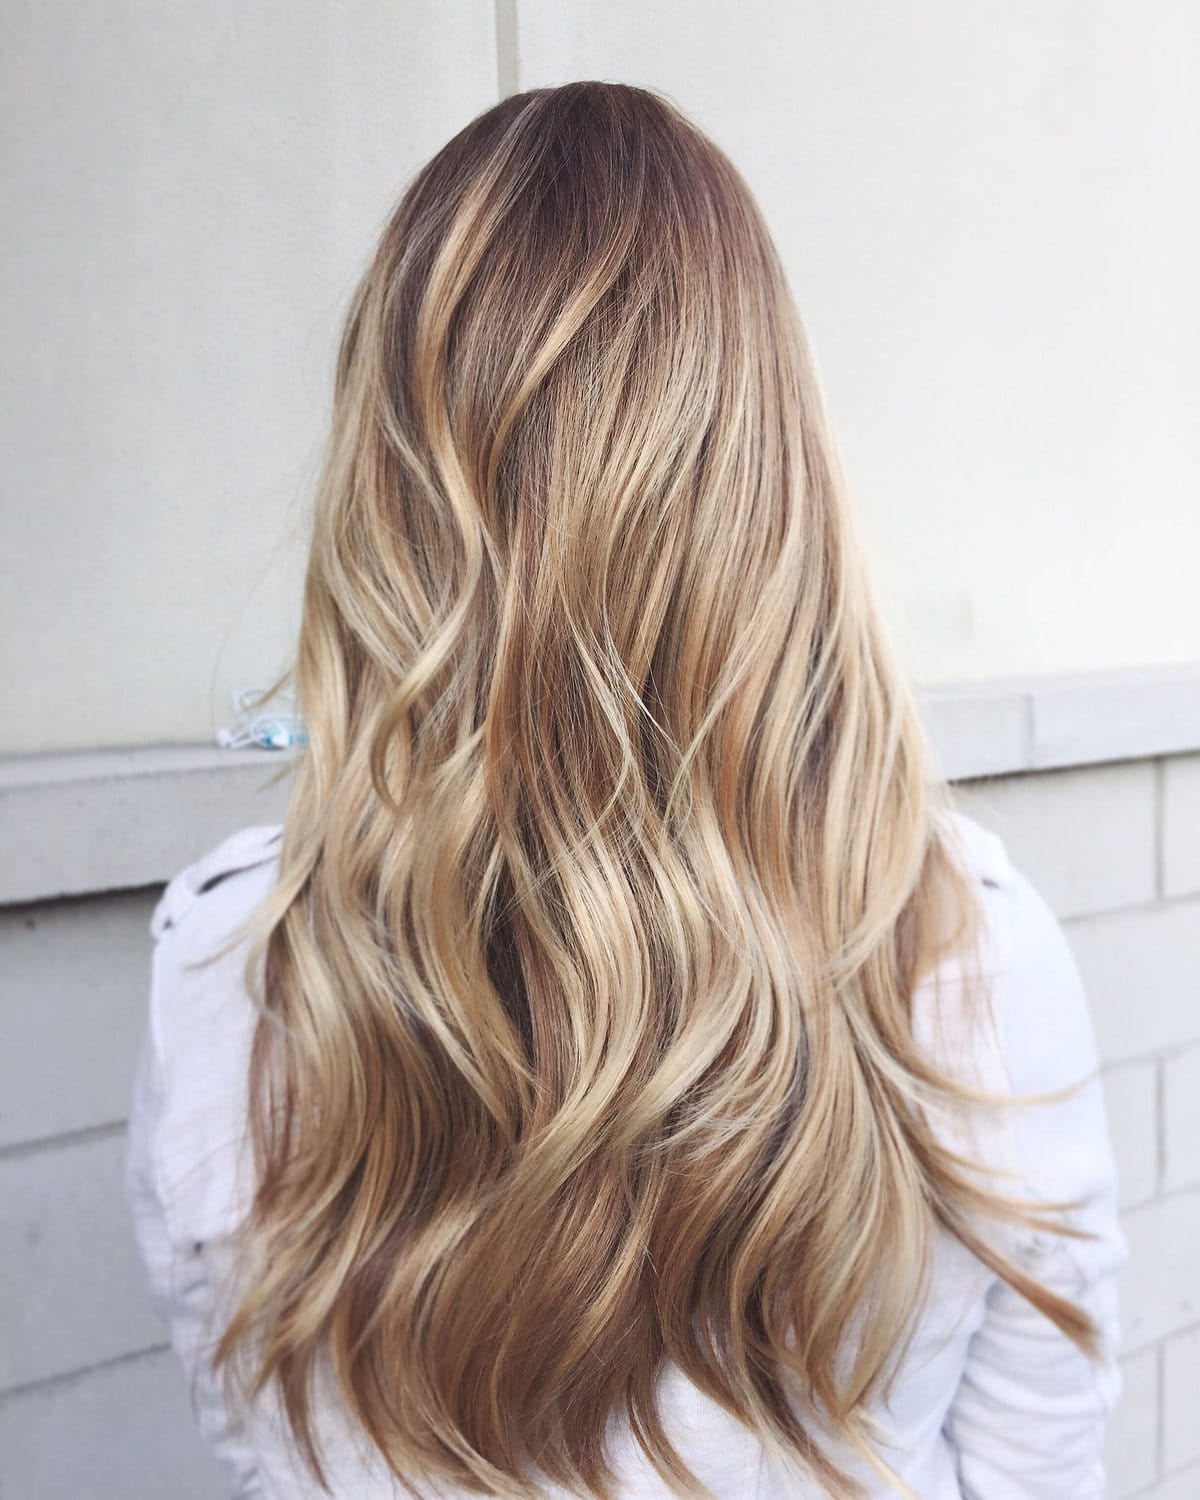 Top 10 most beautiful hair colors in 2019